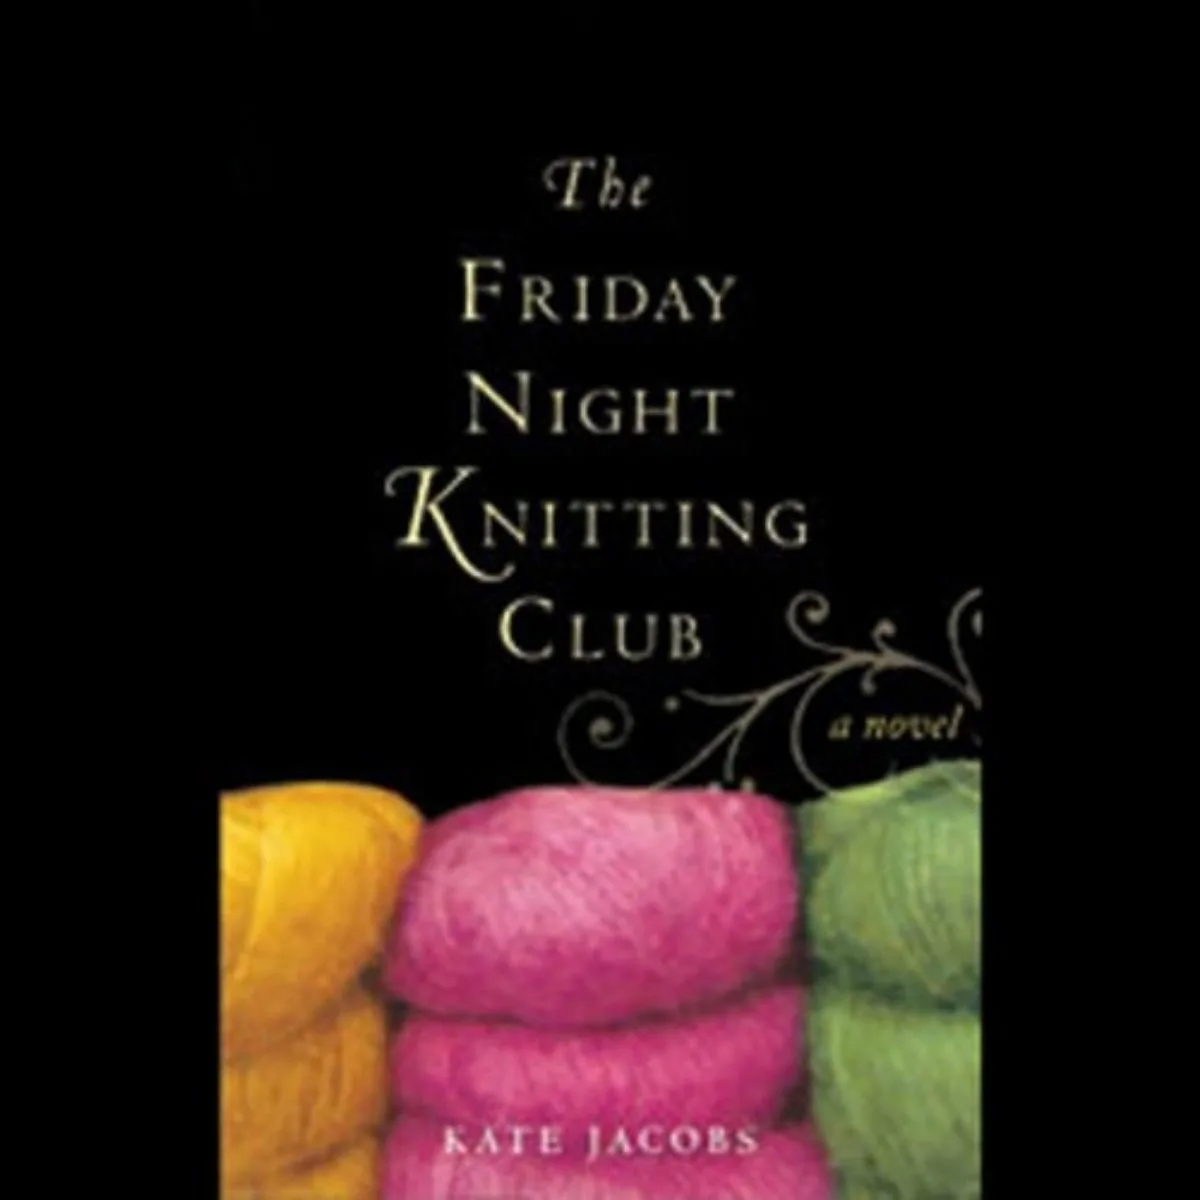 The Friday Night Knitting Club audiobook idea of what to do while crocheting or knitting.